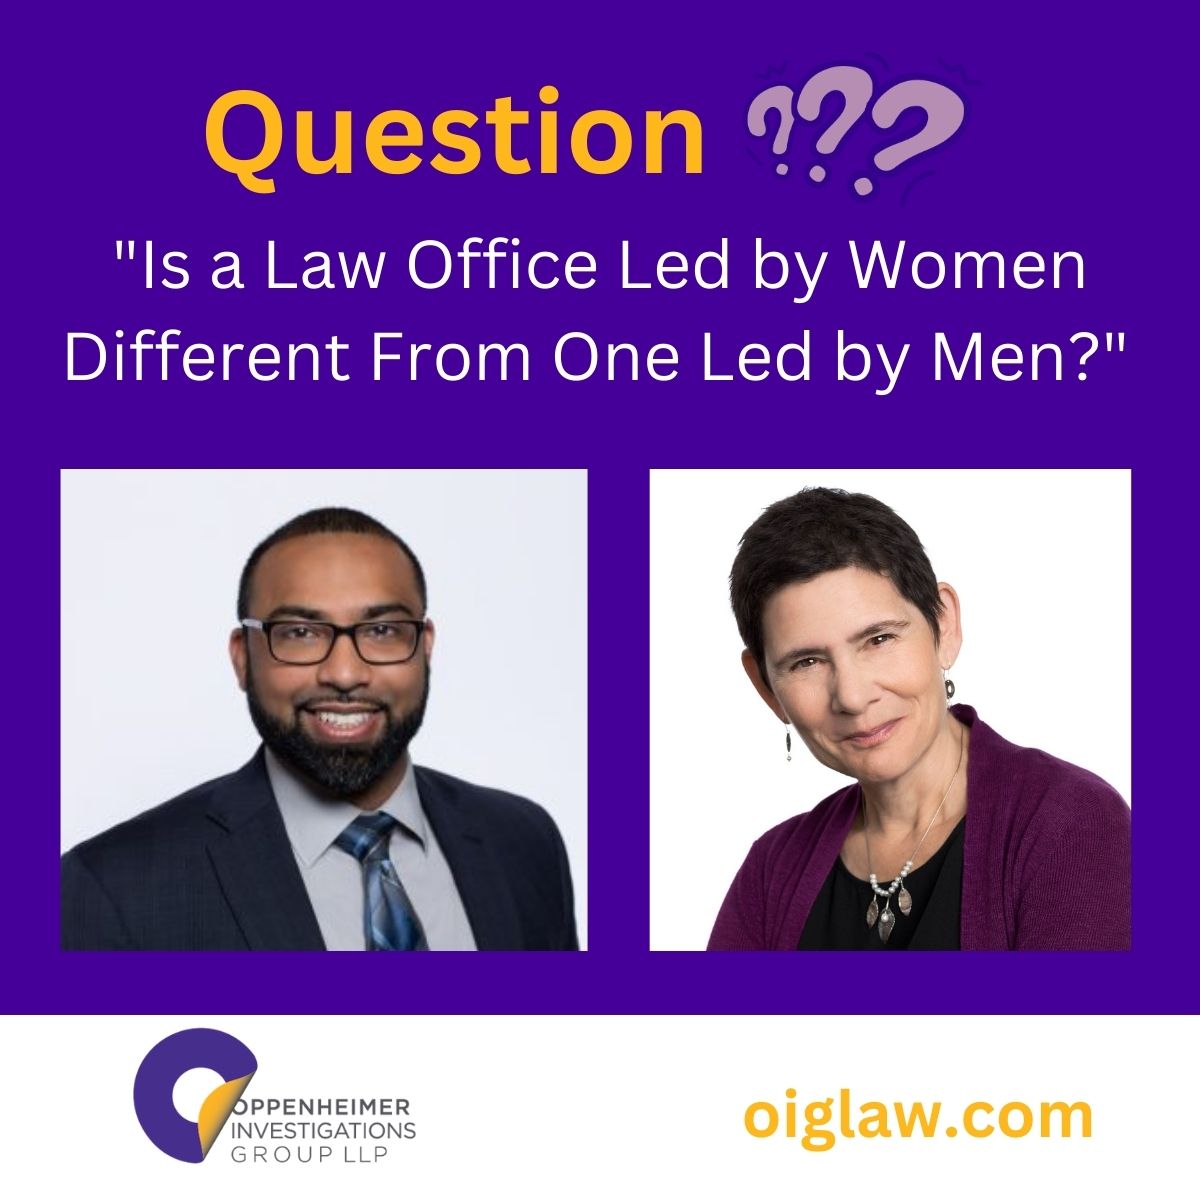 Question: Is a Law Office Led by Women Different From One Led by Men?